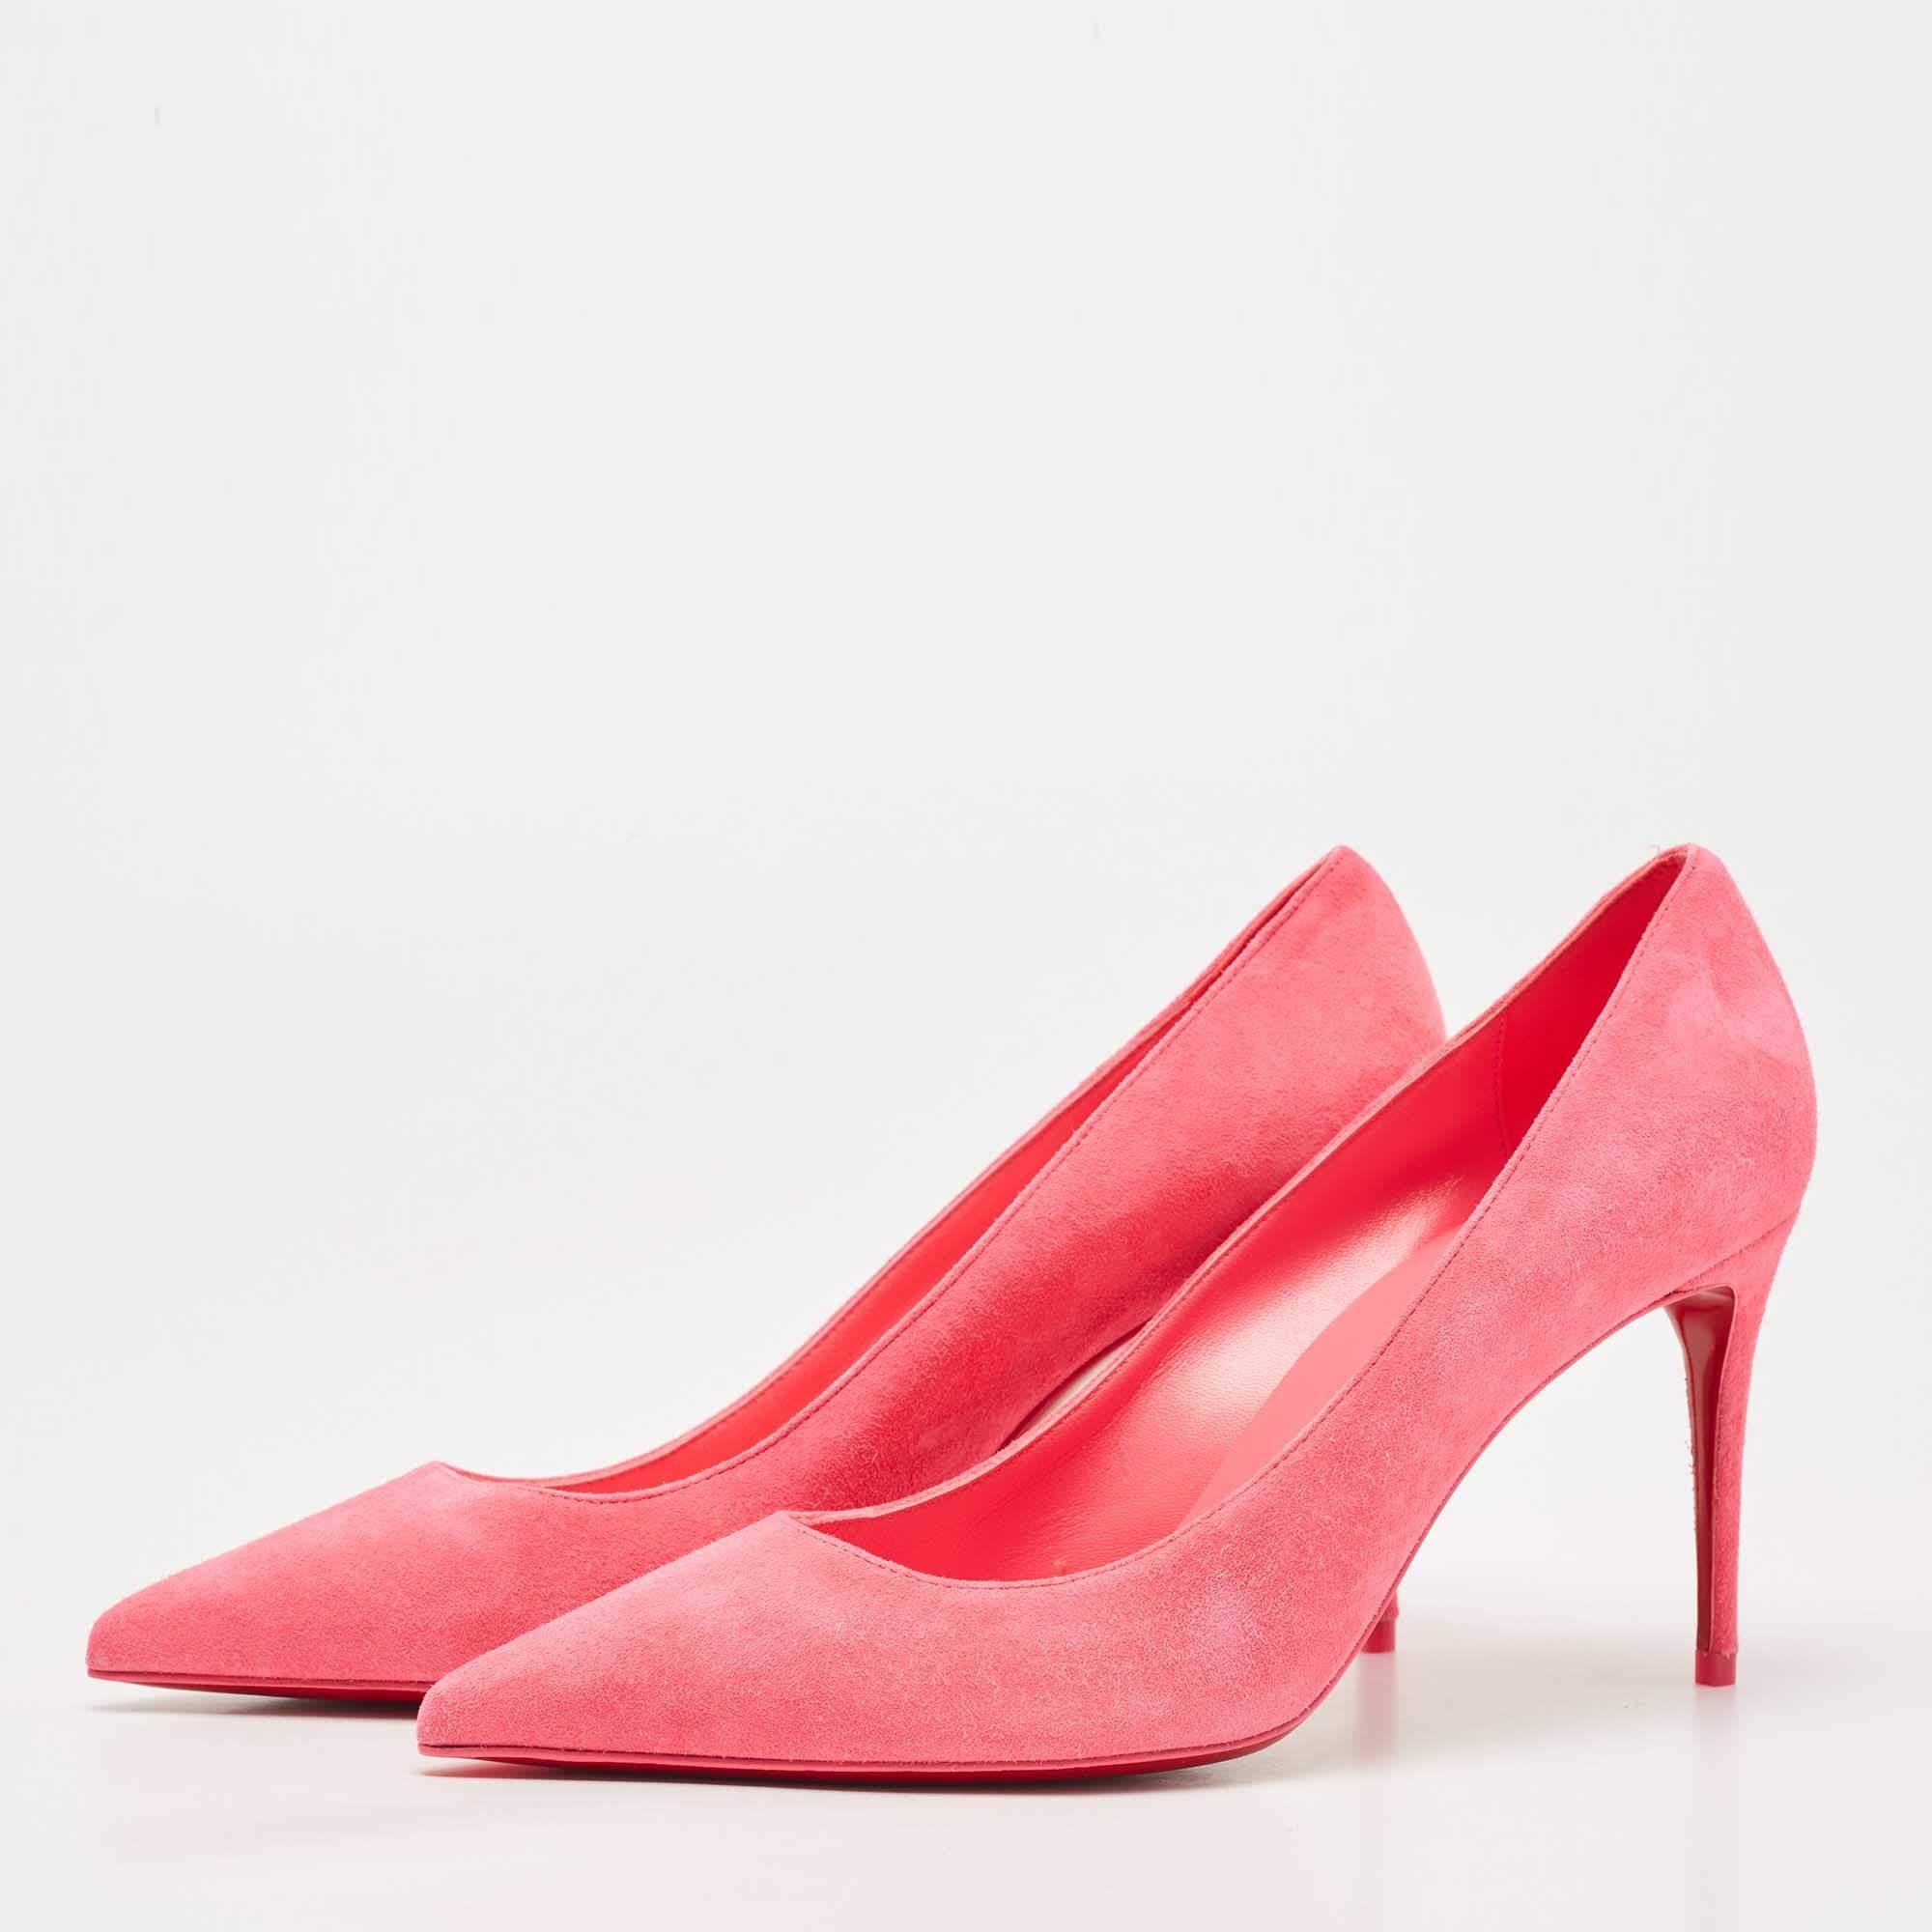 Women's Christian Louboutin Pink Suede Kate Pumps Size 38